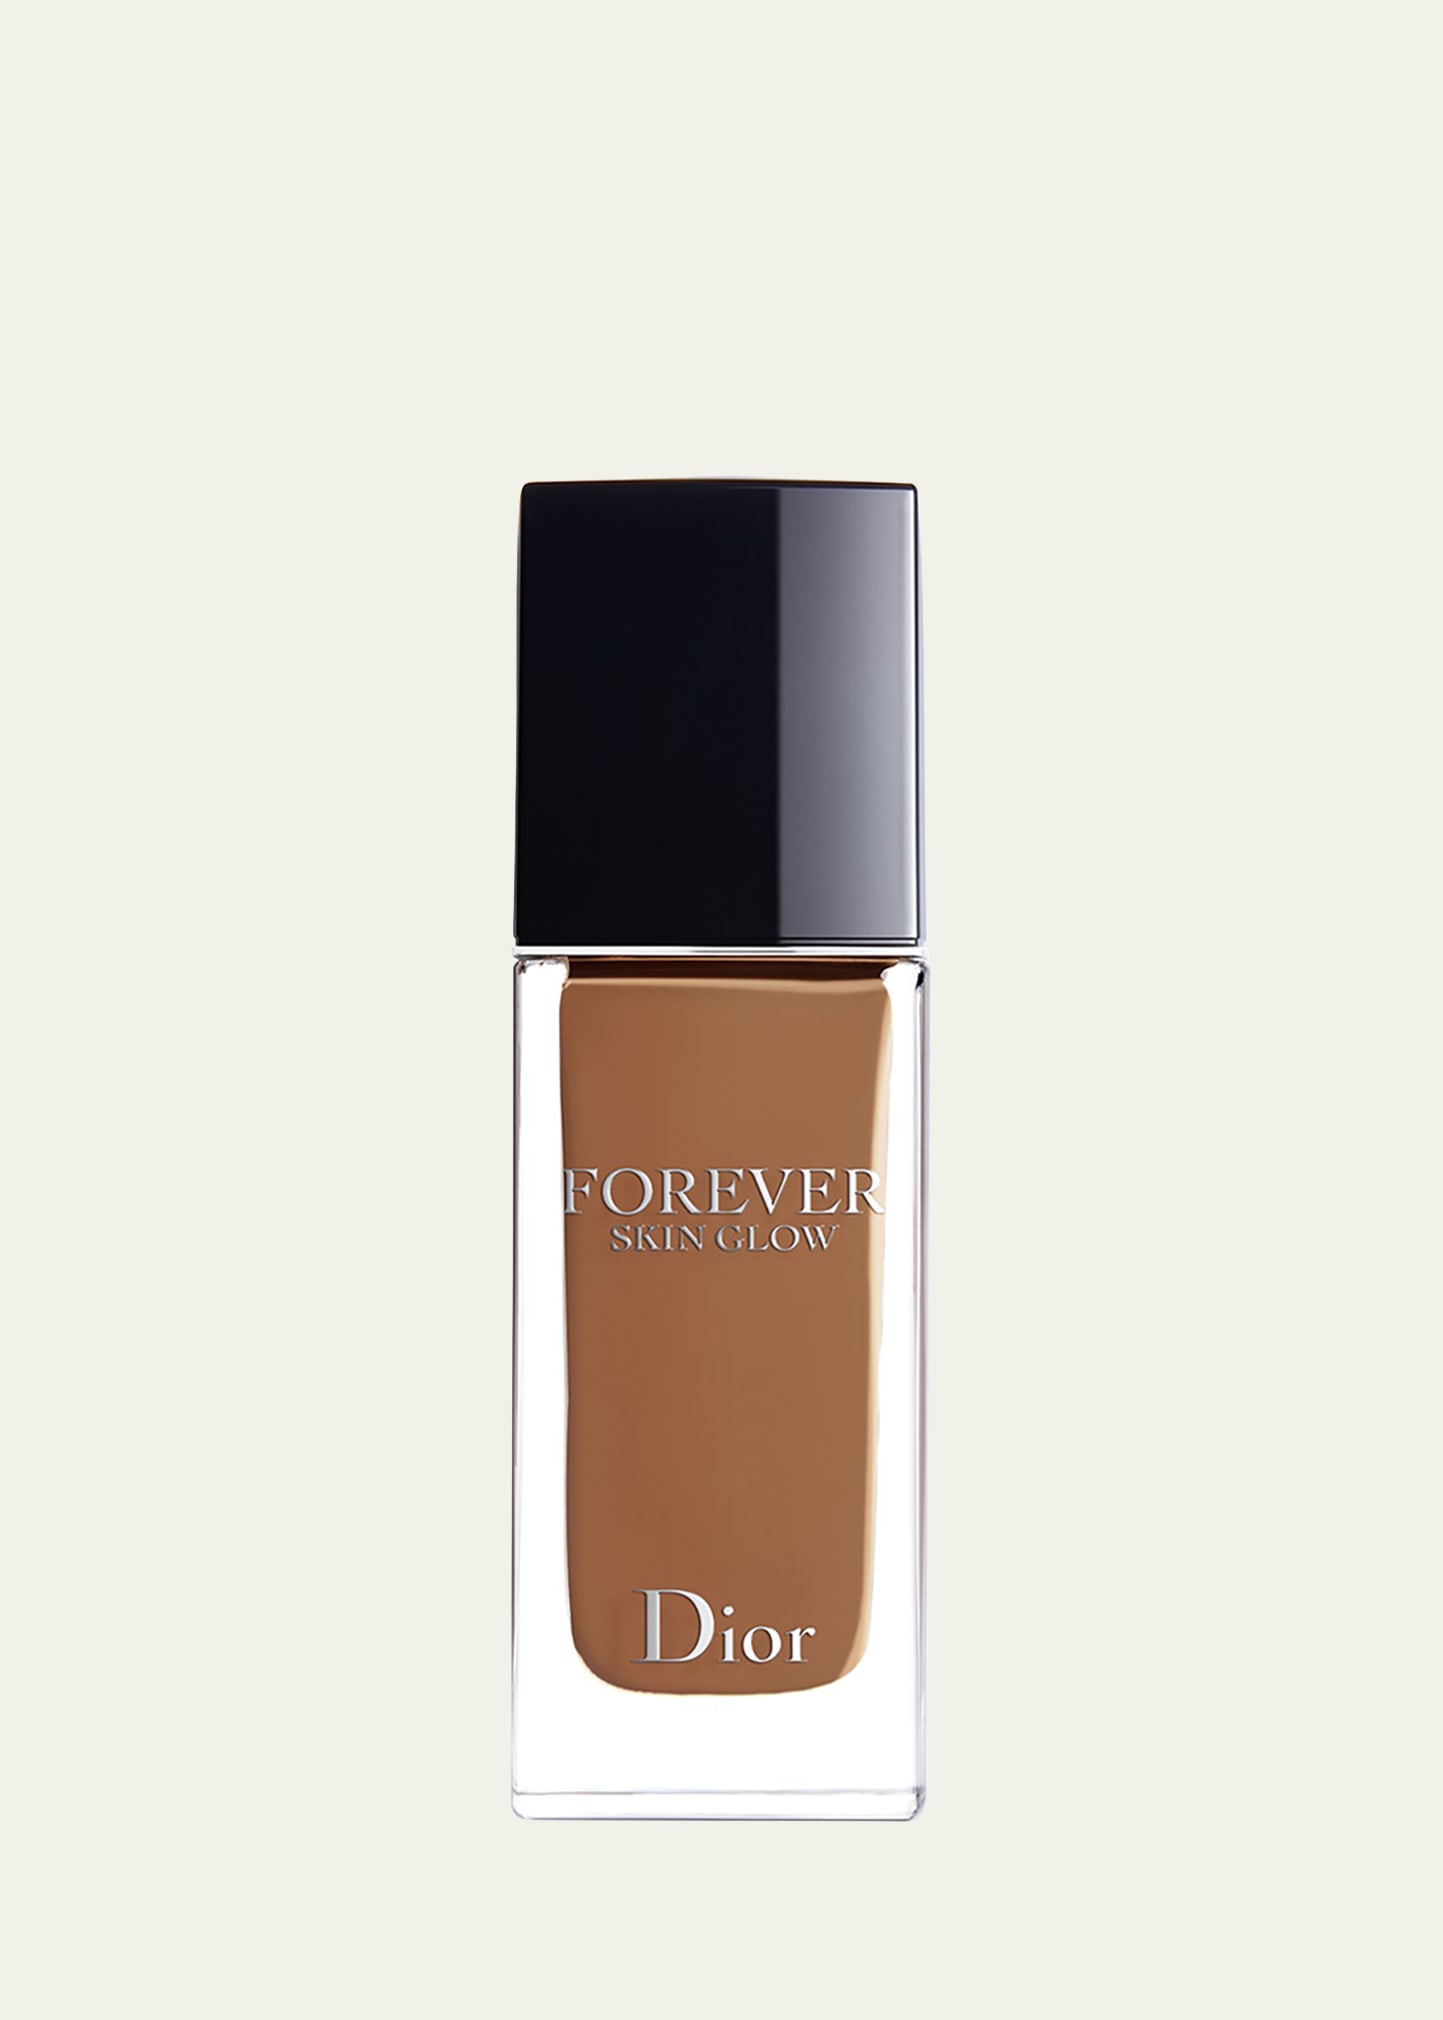 Dior 1 Oz.  Forever Skin Glow Hydrating Foundation Spf 15 In 6.5 Neutral